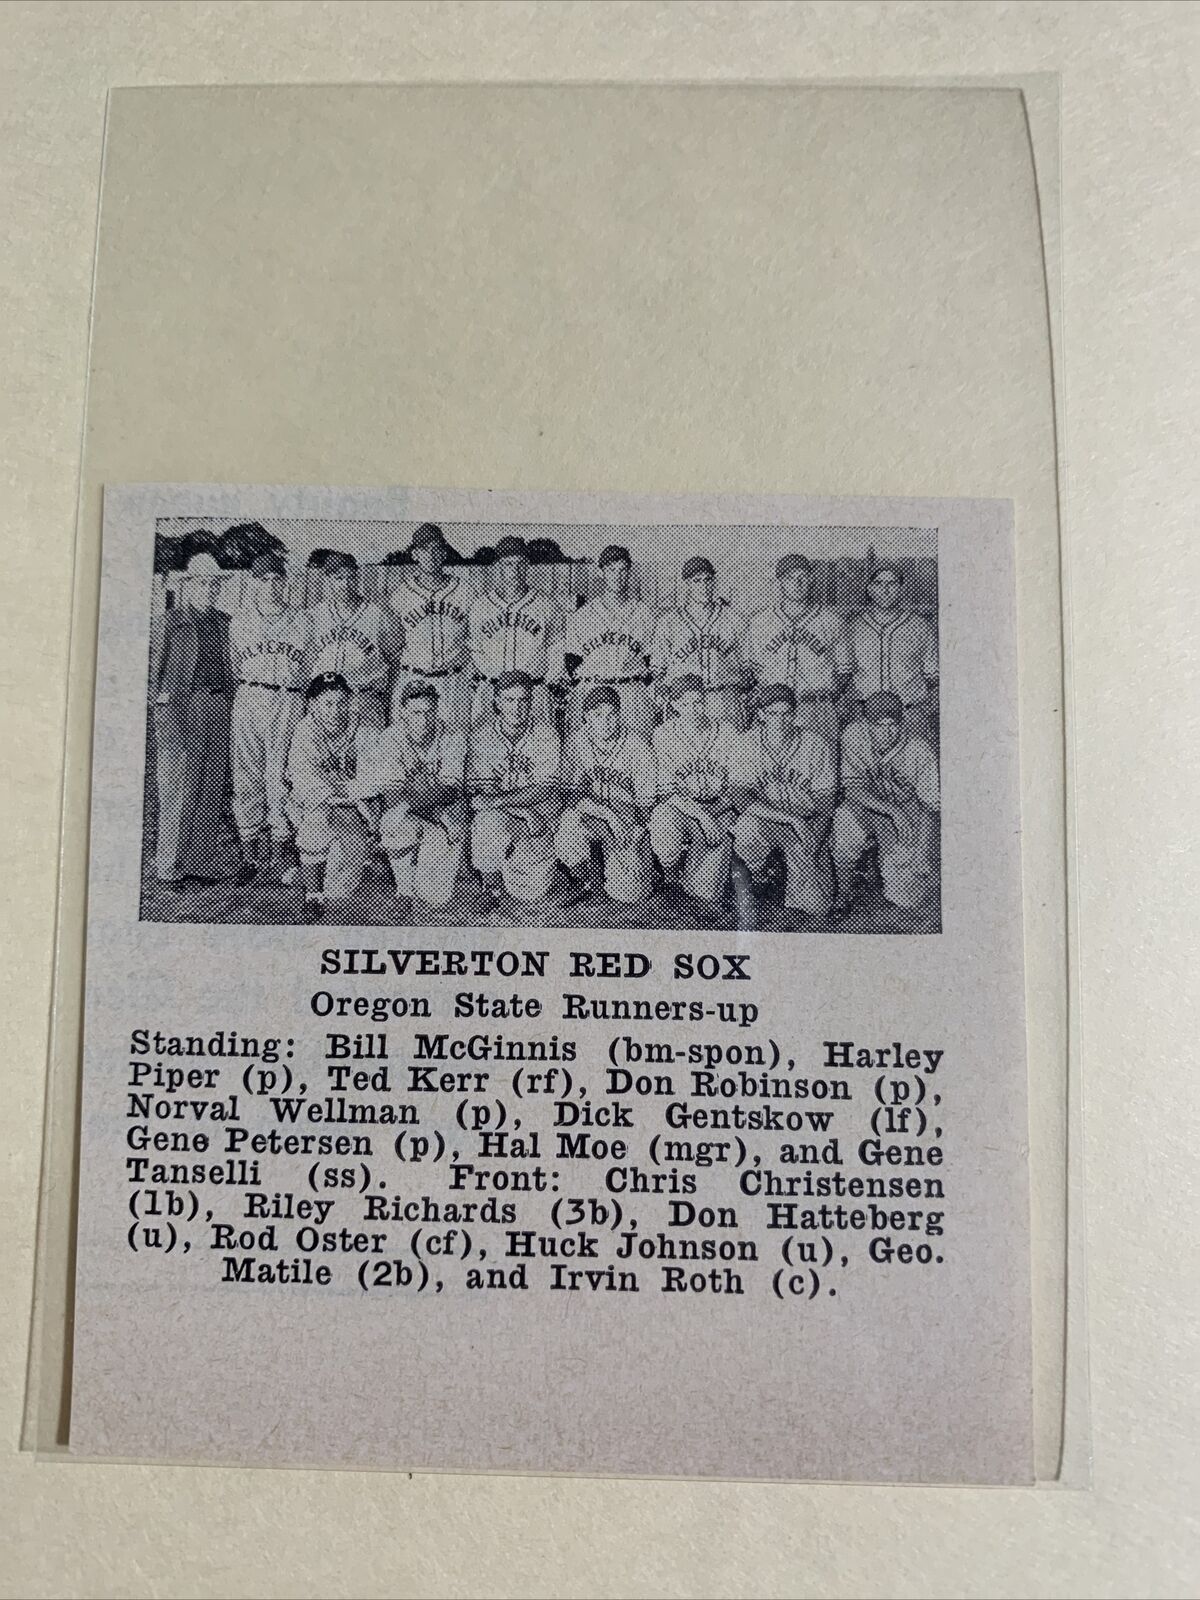 Silverton Red Sox Oregon Runners Up 1950 Baseball Team Picture